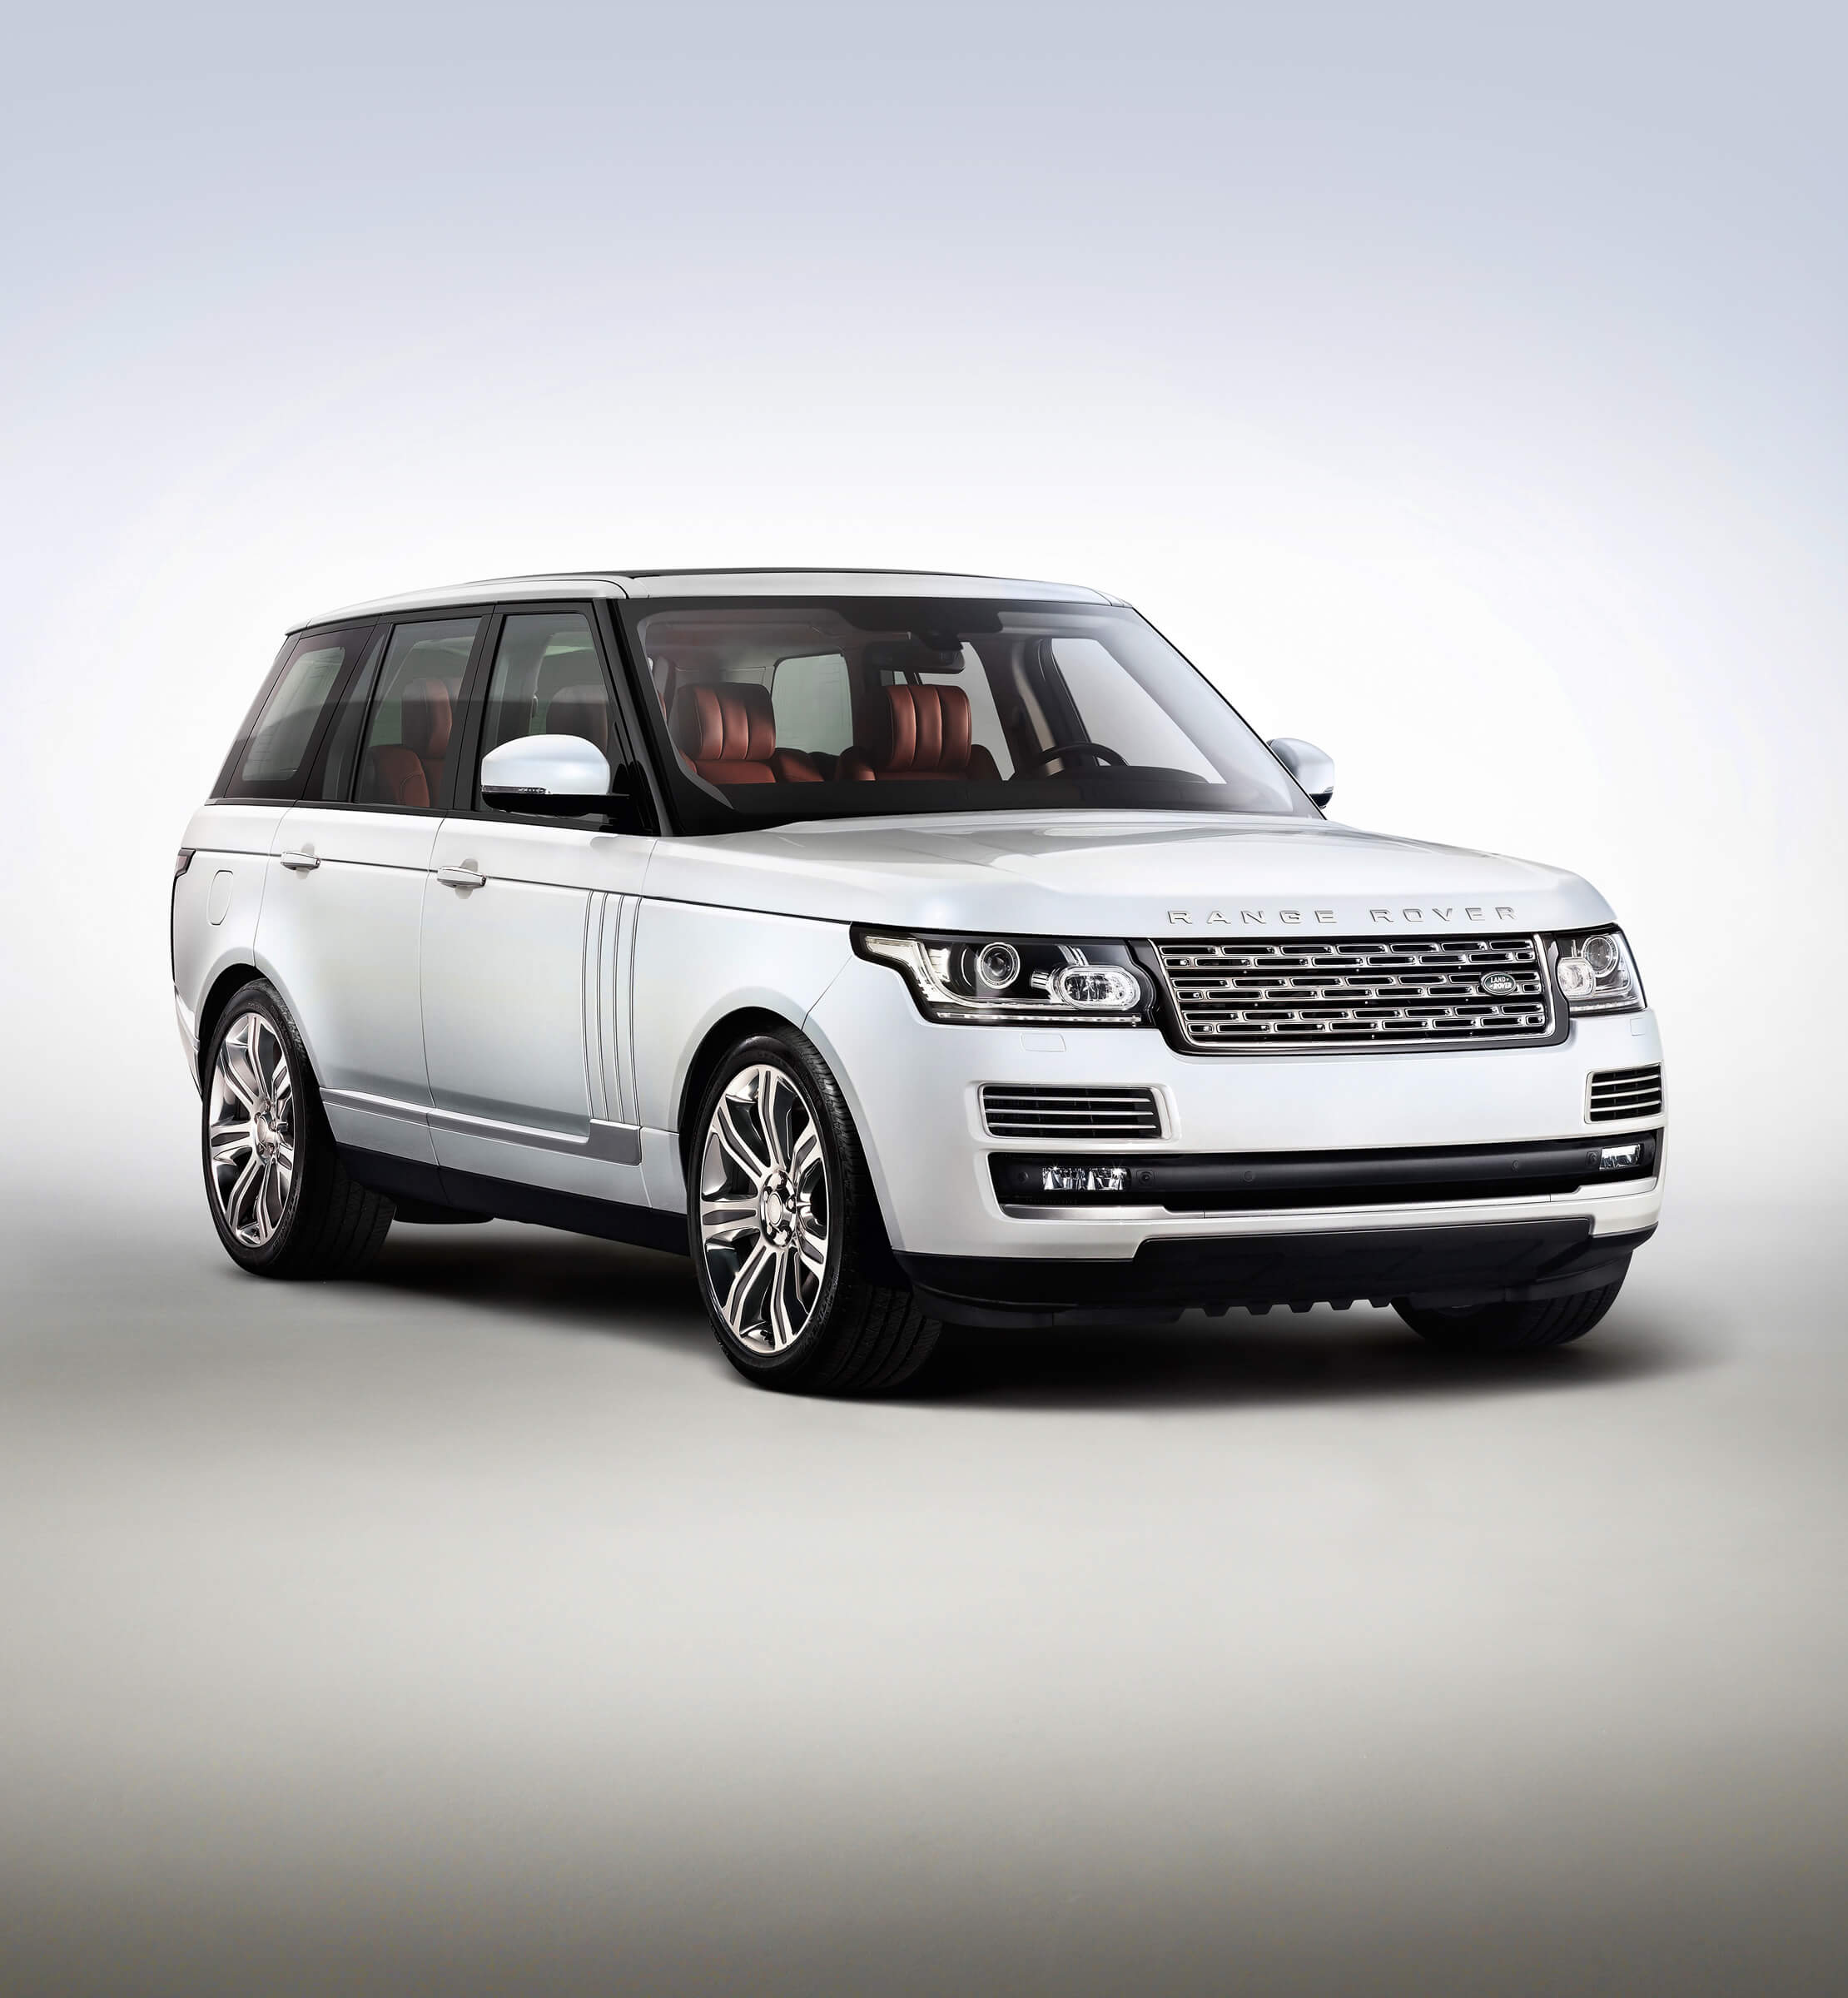 Profile shot of a white Land Rover Range Rover, with red leather interior on a blue and grey background